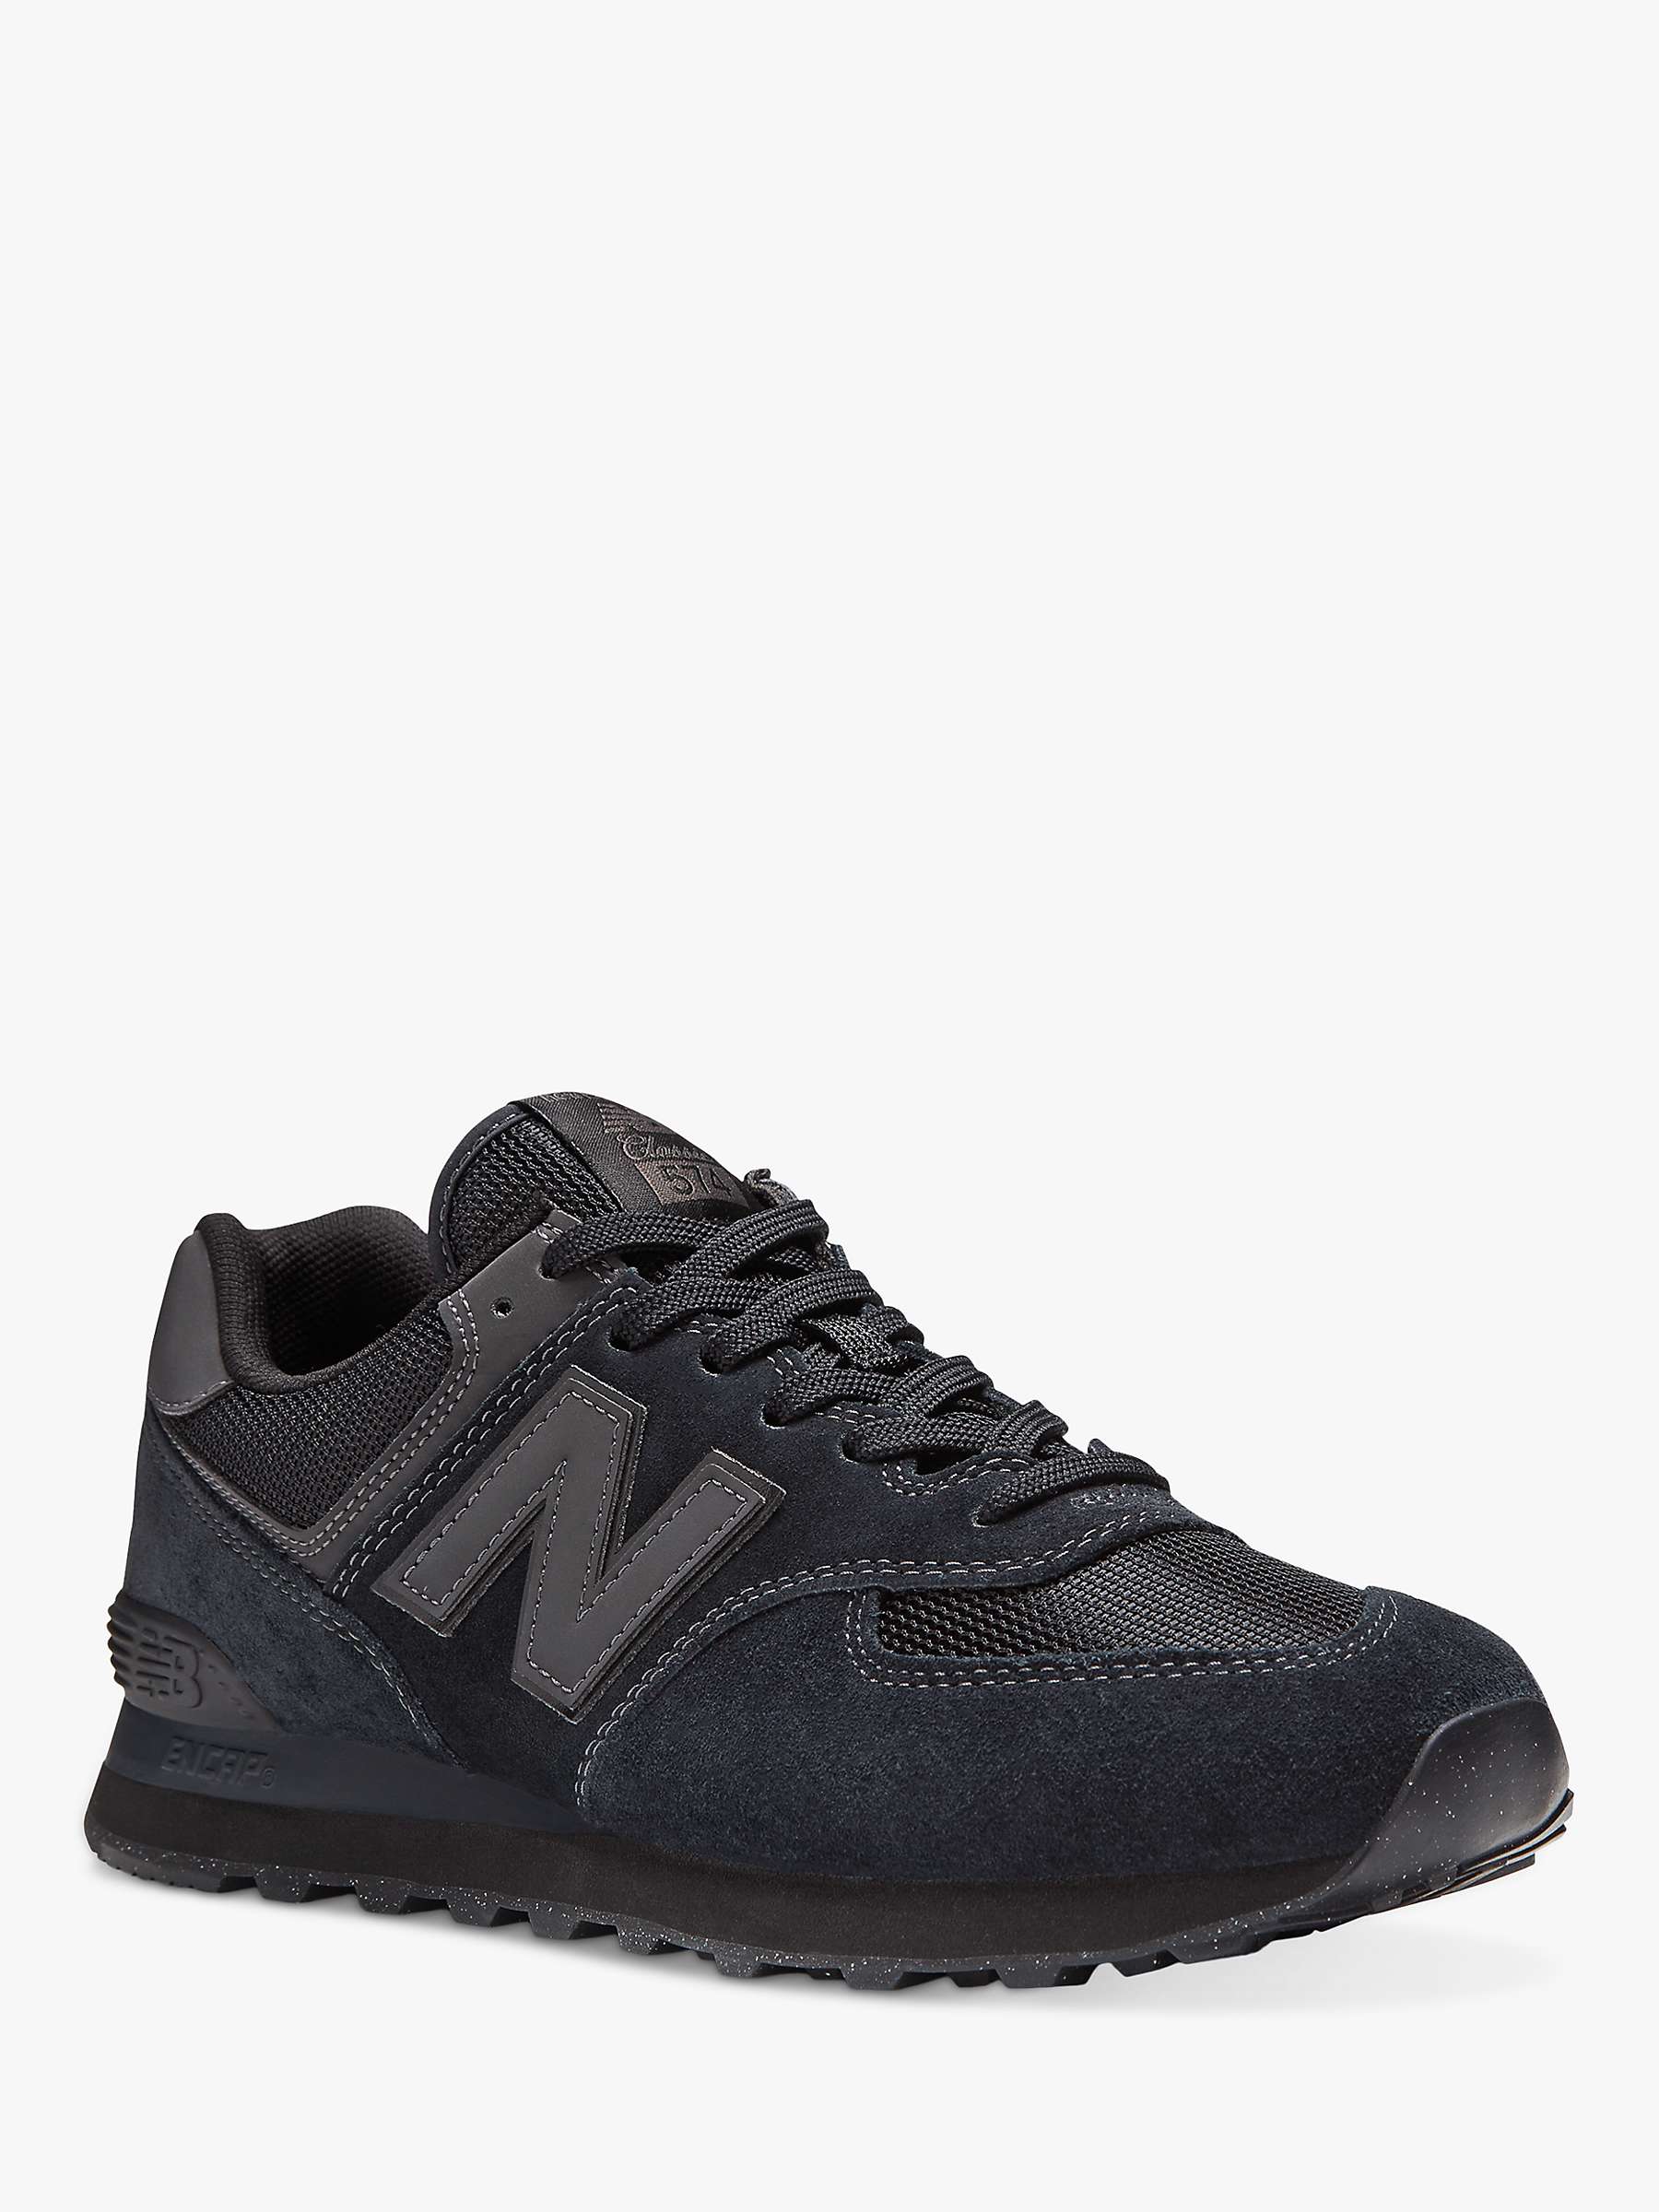 Buy New Balance 574 Suede Trainers Online at johnlewis.com